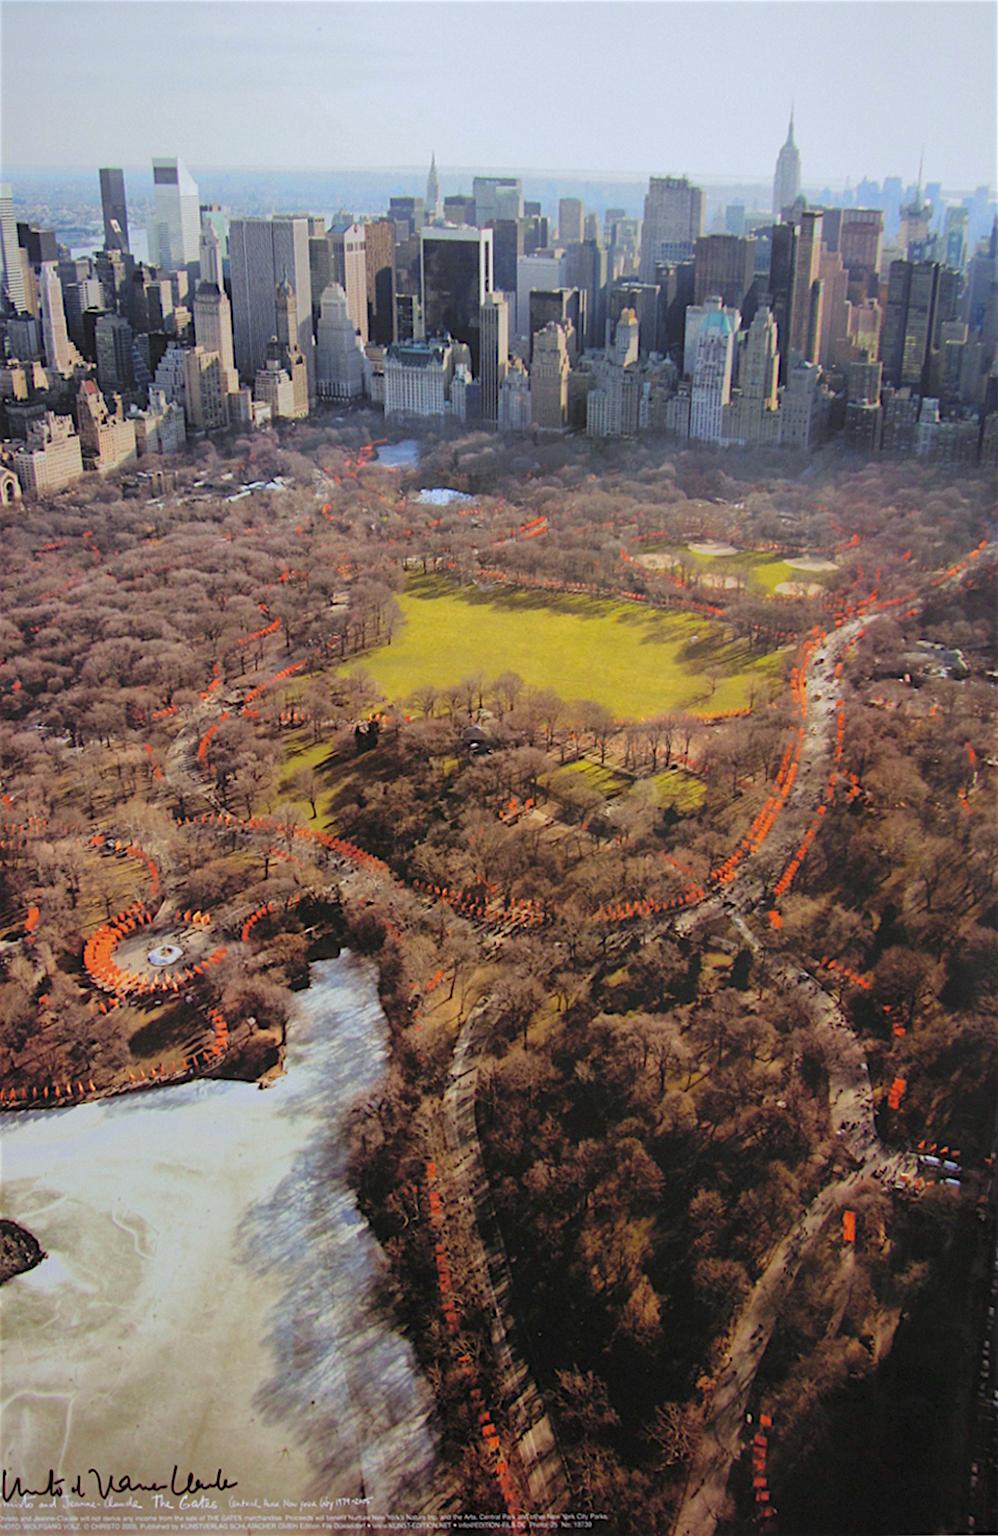 This offset lithograph on high gloss paper photographed by Wolfgang Volz for the Project for Central Park, New York City, was created in 2005. One of 300 hand-signed by the artist and Jeanne Claude in black marker from an unnumbered edition, it